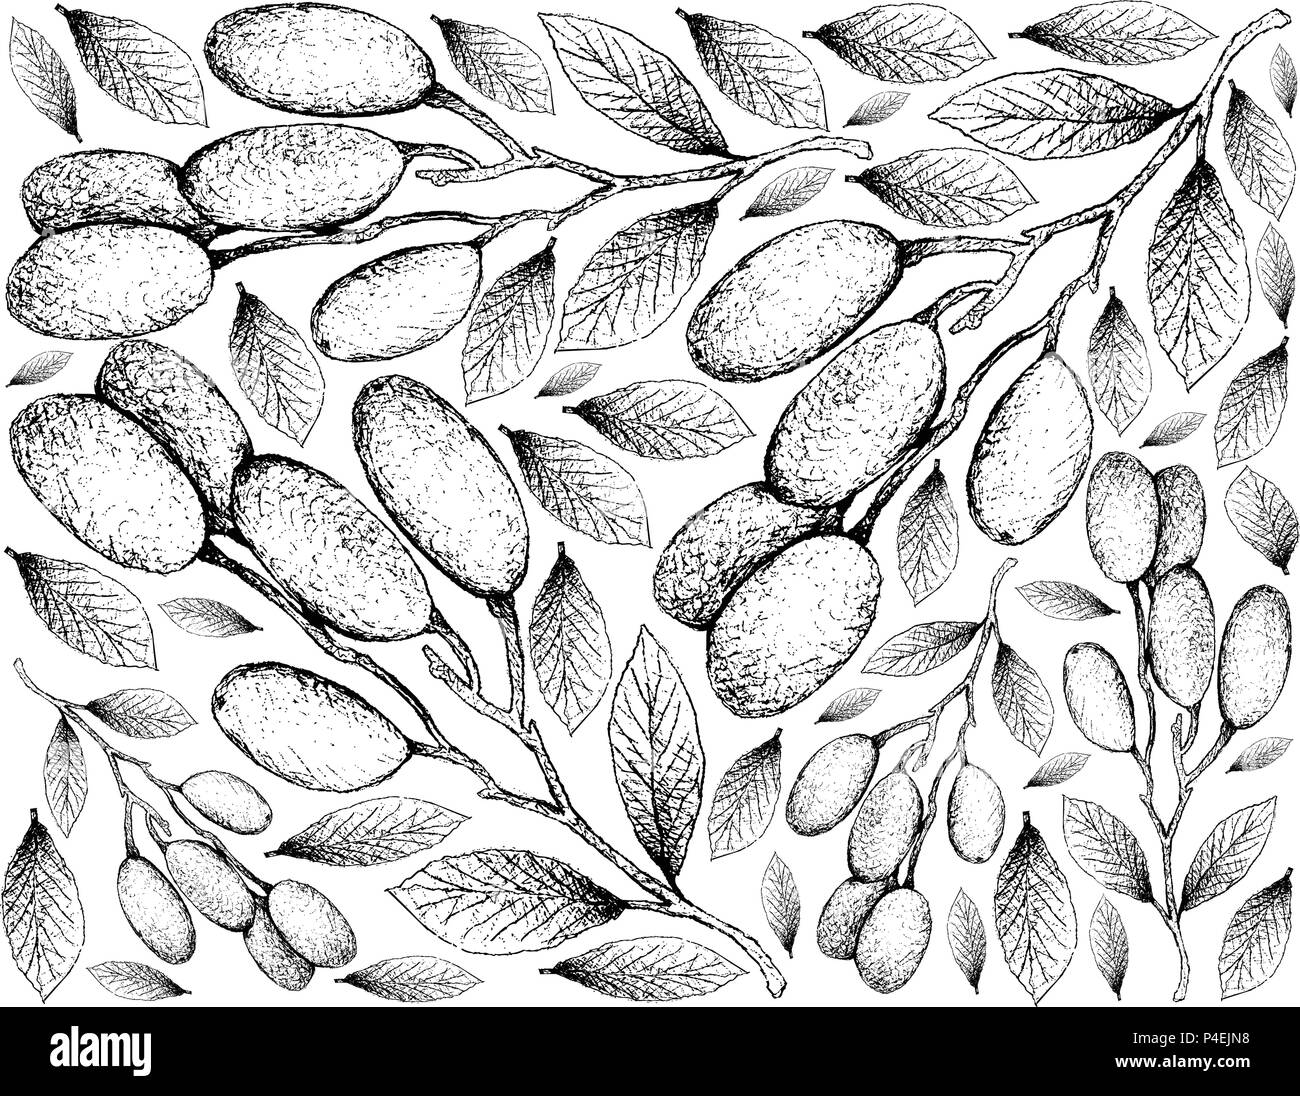 Tropical Fruit, Illustration Wallpaper of Hand Drawn Sketch of Fresh Elaeocarpus Hygrophilus Fruits Isolated on White Background. Stock Vector